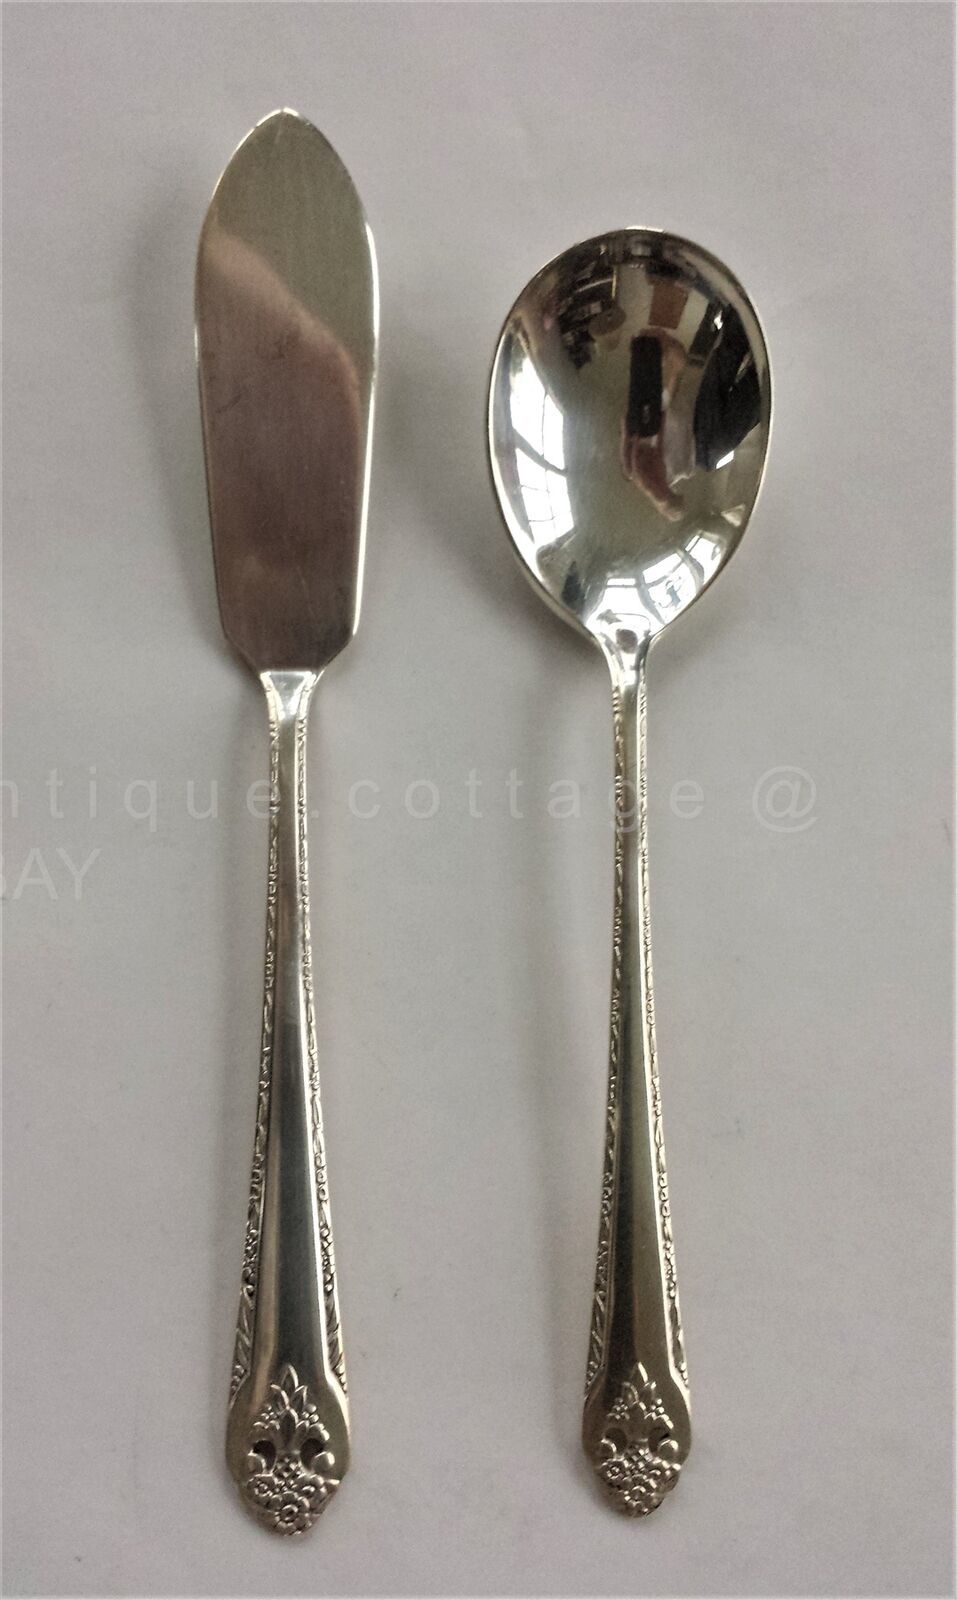 Primary image for HOLMES EDWARDS INLAID silverplate LOVELY LADY flatware BUTTER KNIFE SUGAR SPOON